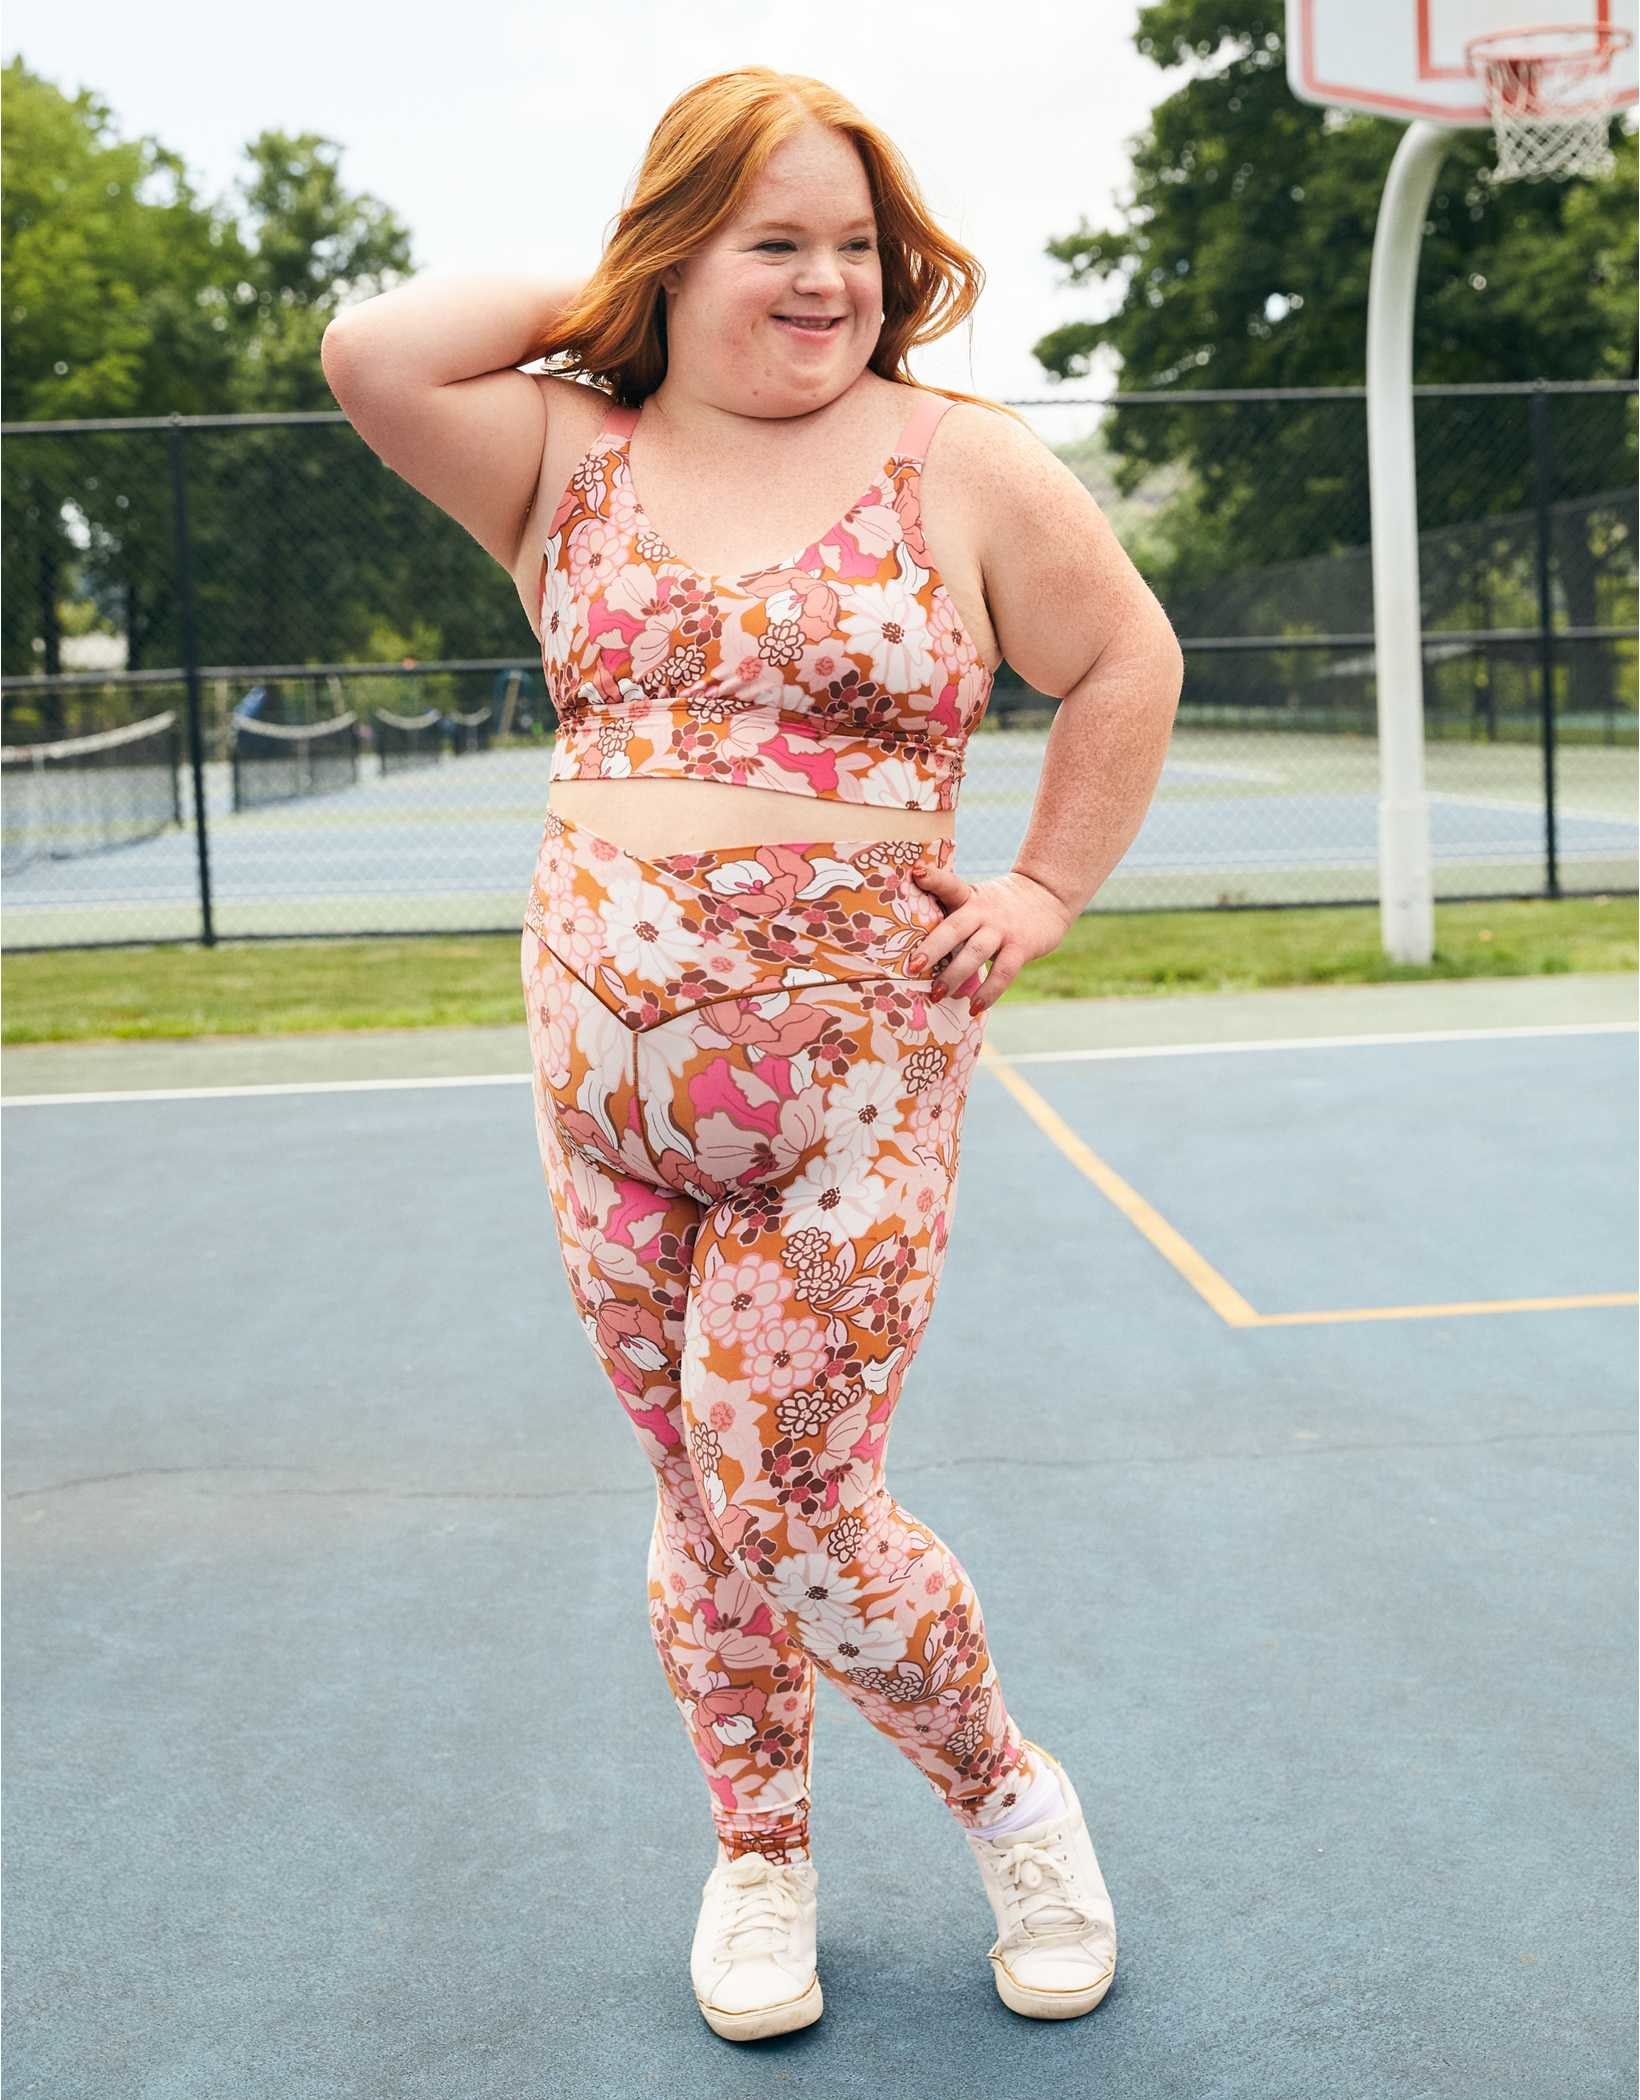 model wearing the floral leggings with matching sports bra and white shoes on a sport court